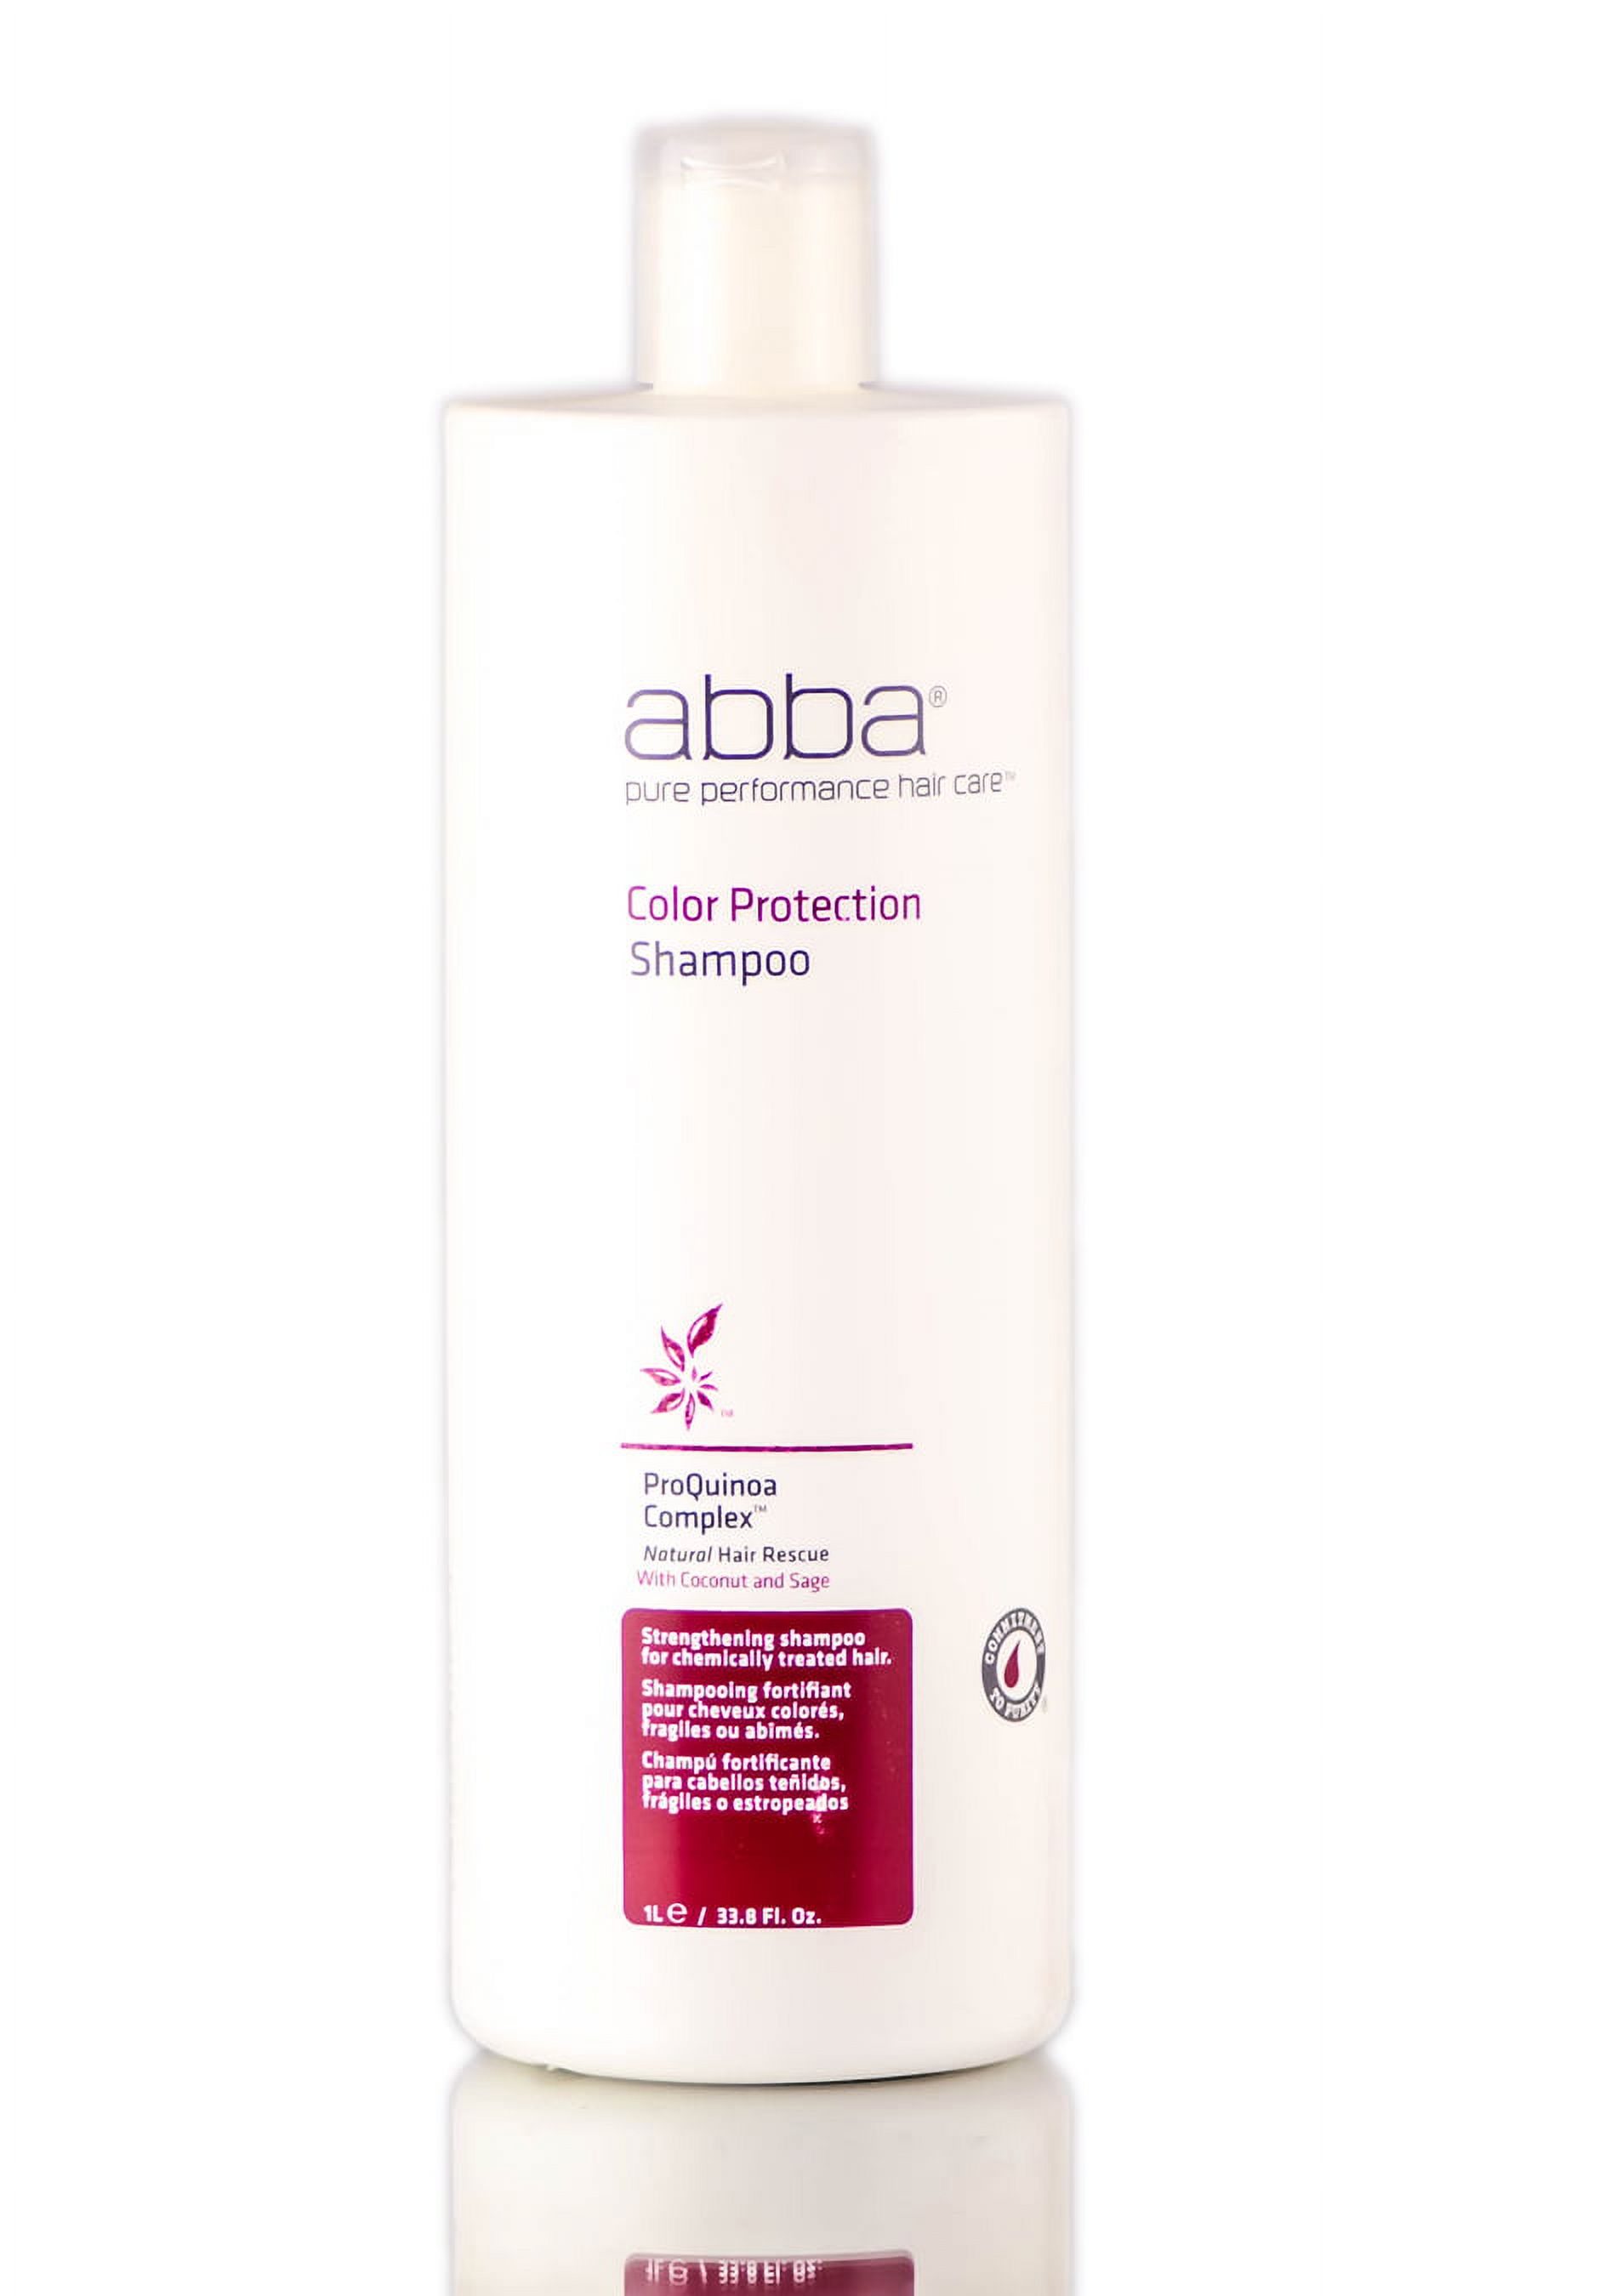 Abba Pure Color Protection Shampoo (33.8 oz / liter) - image 1 of 3